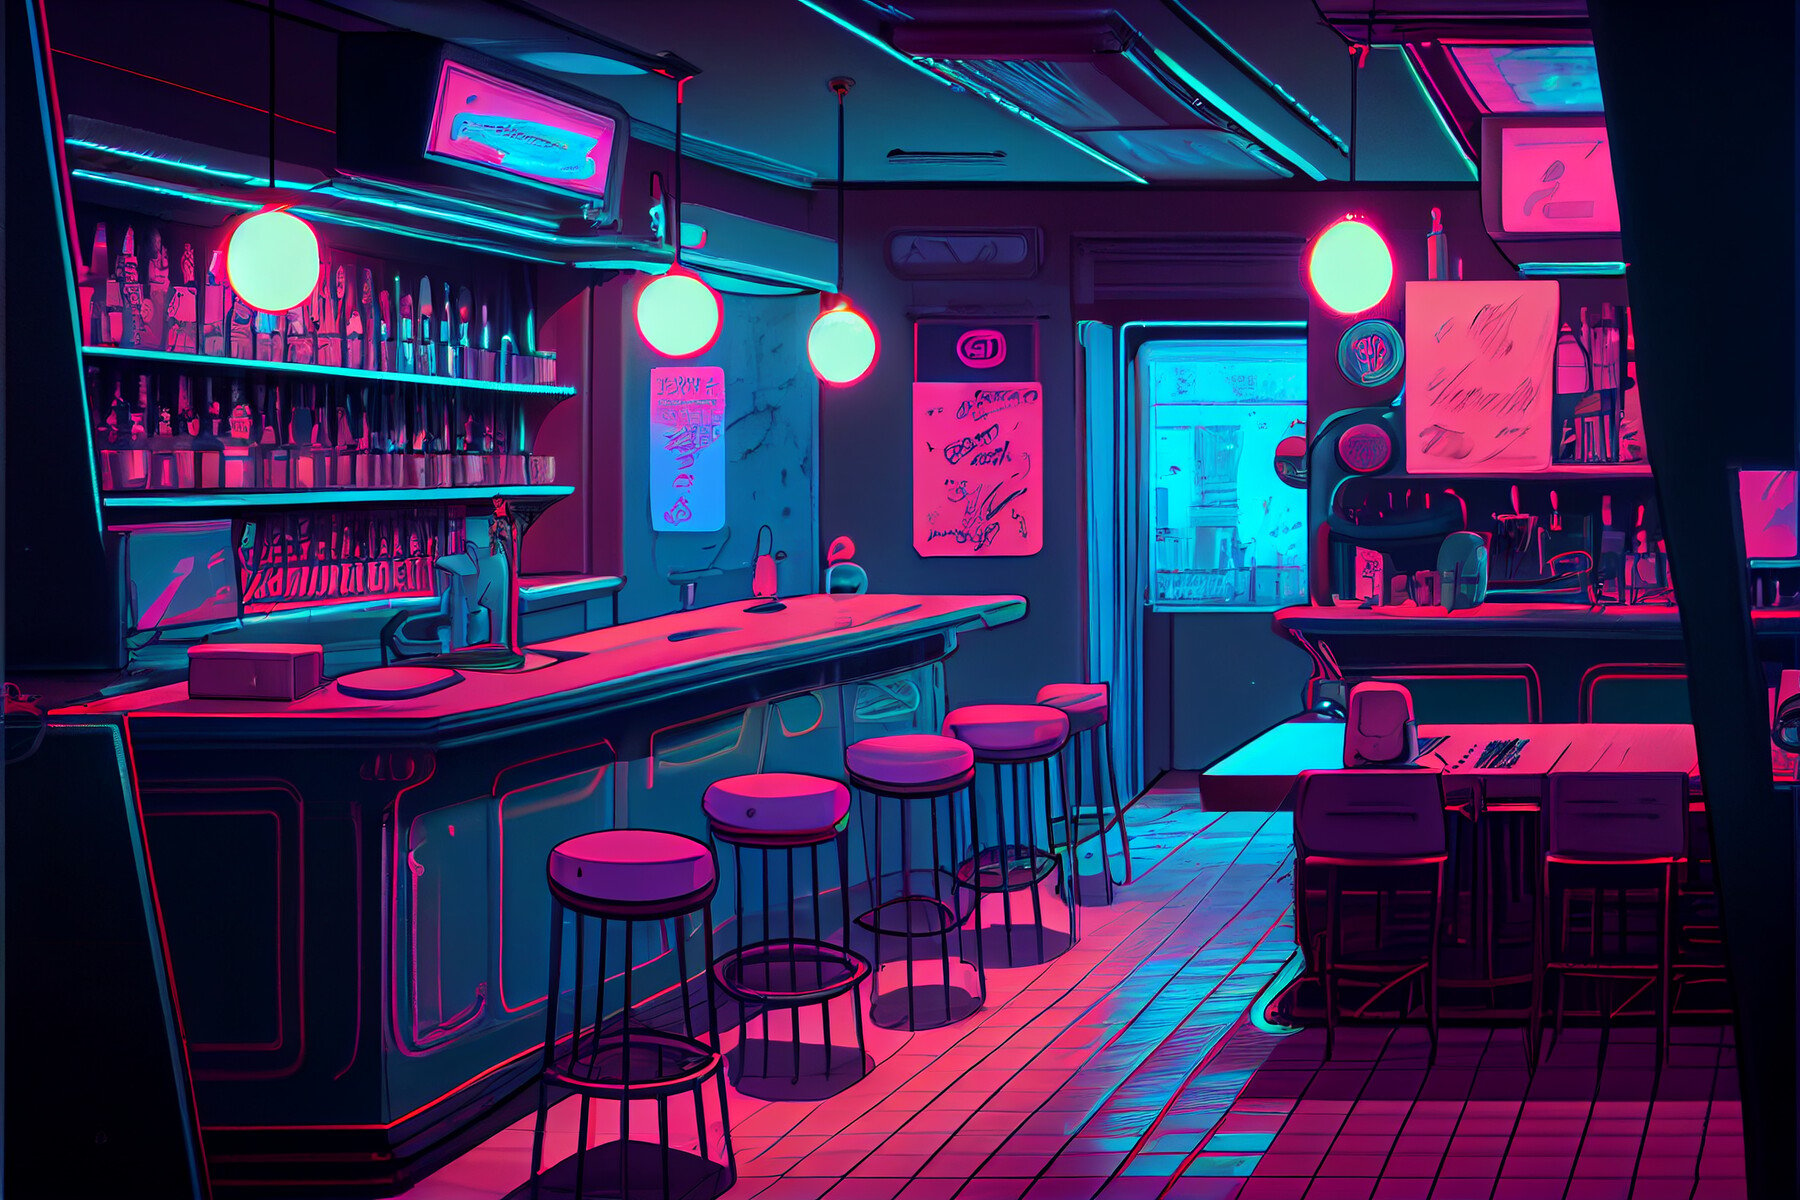 ArtStation - Background - Restaurants and Cafes (Pictures are sharp and ...